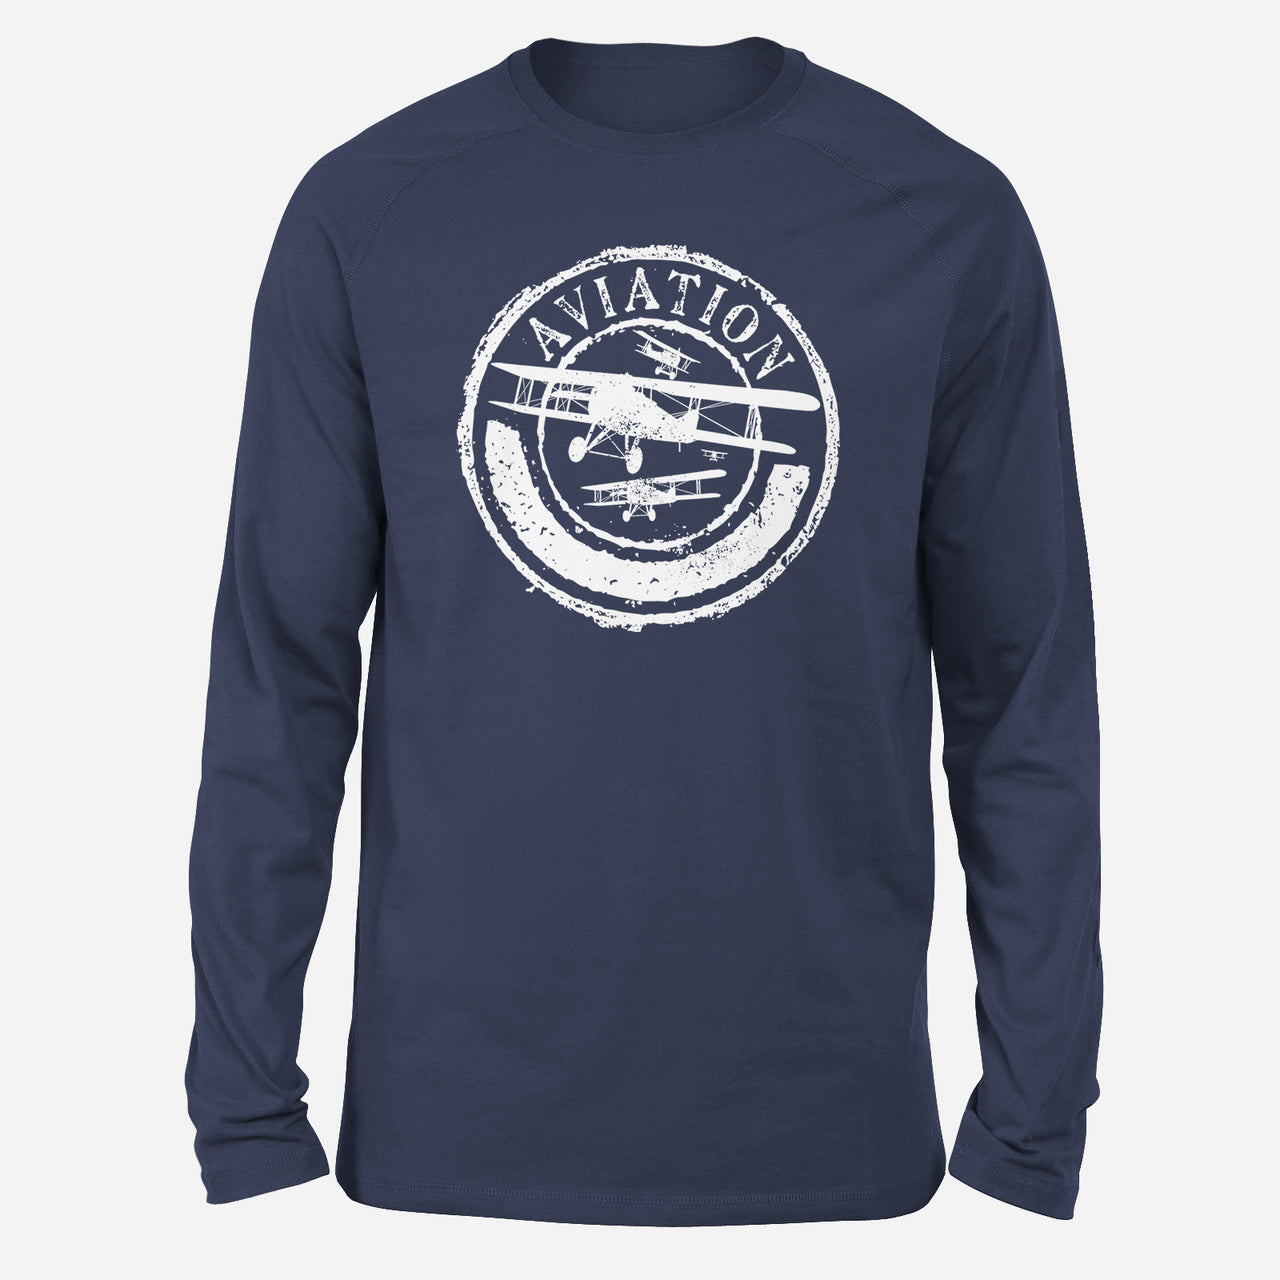 Aviation Lovers Designed Long-Sleeve T-Shirts